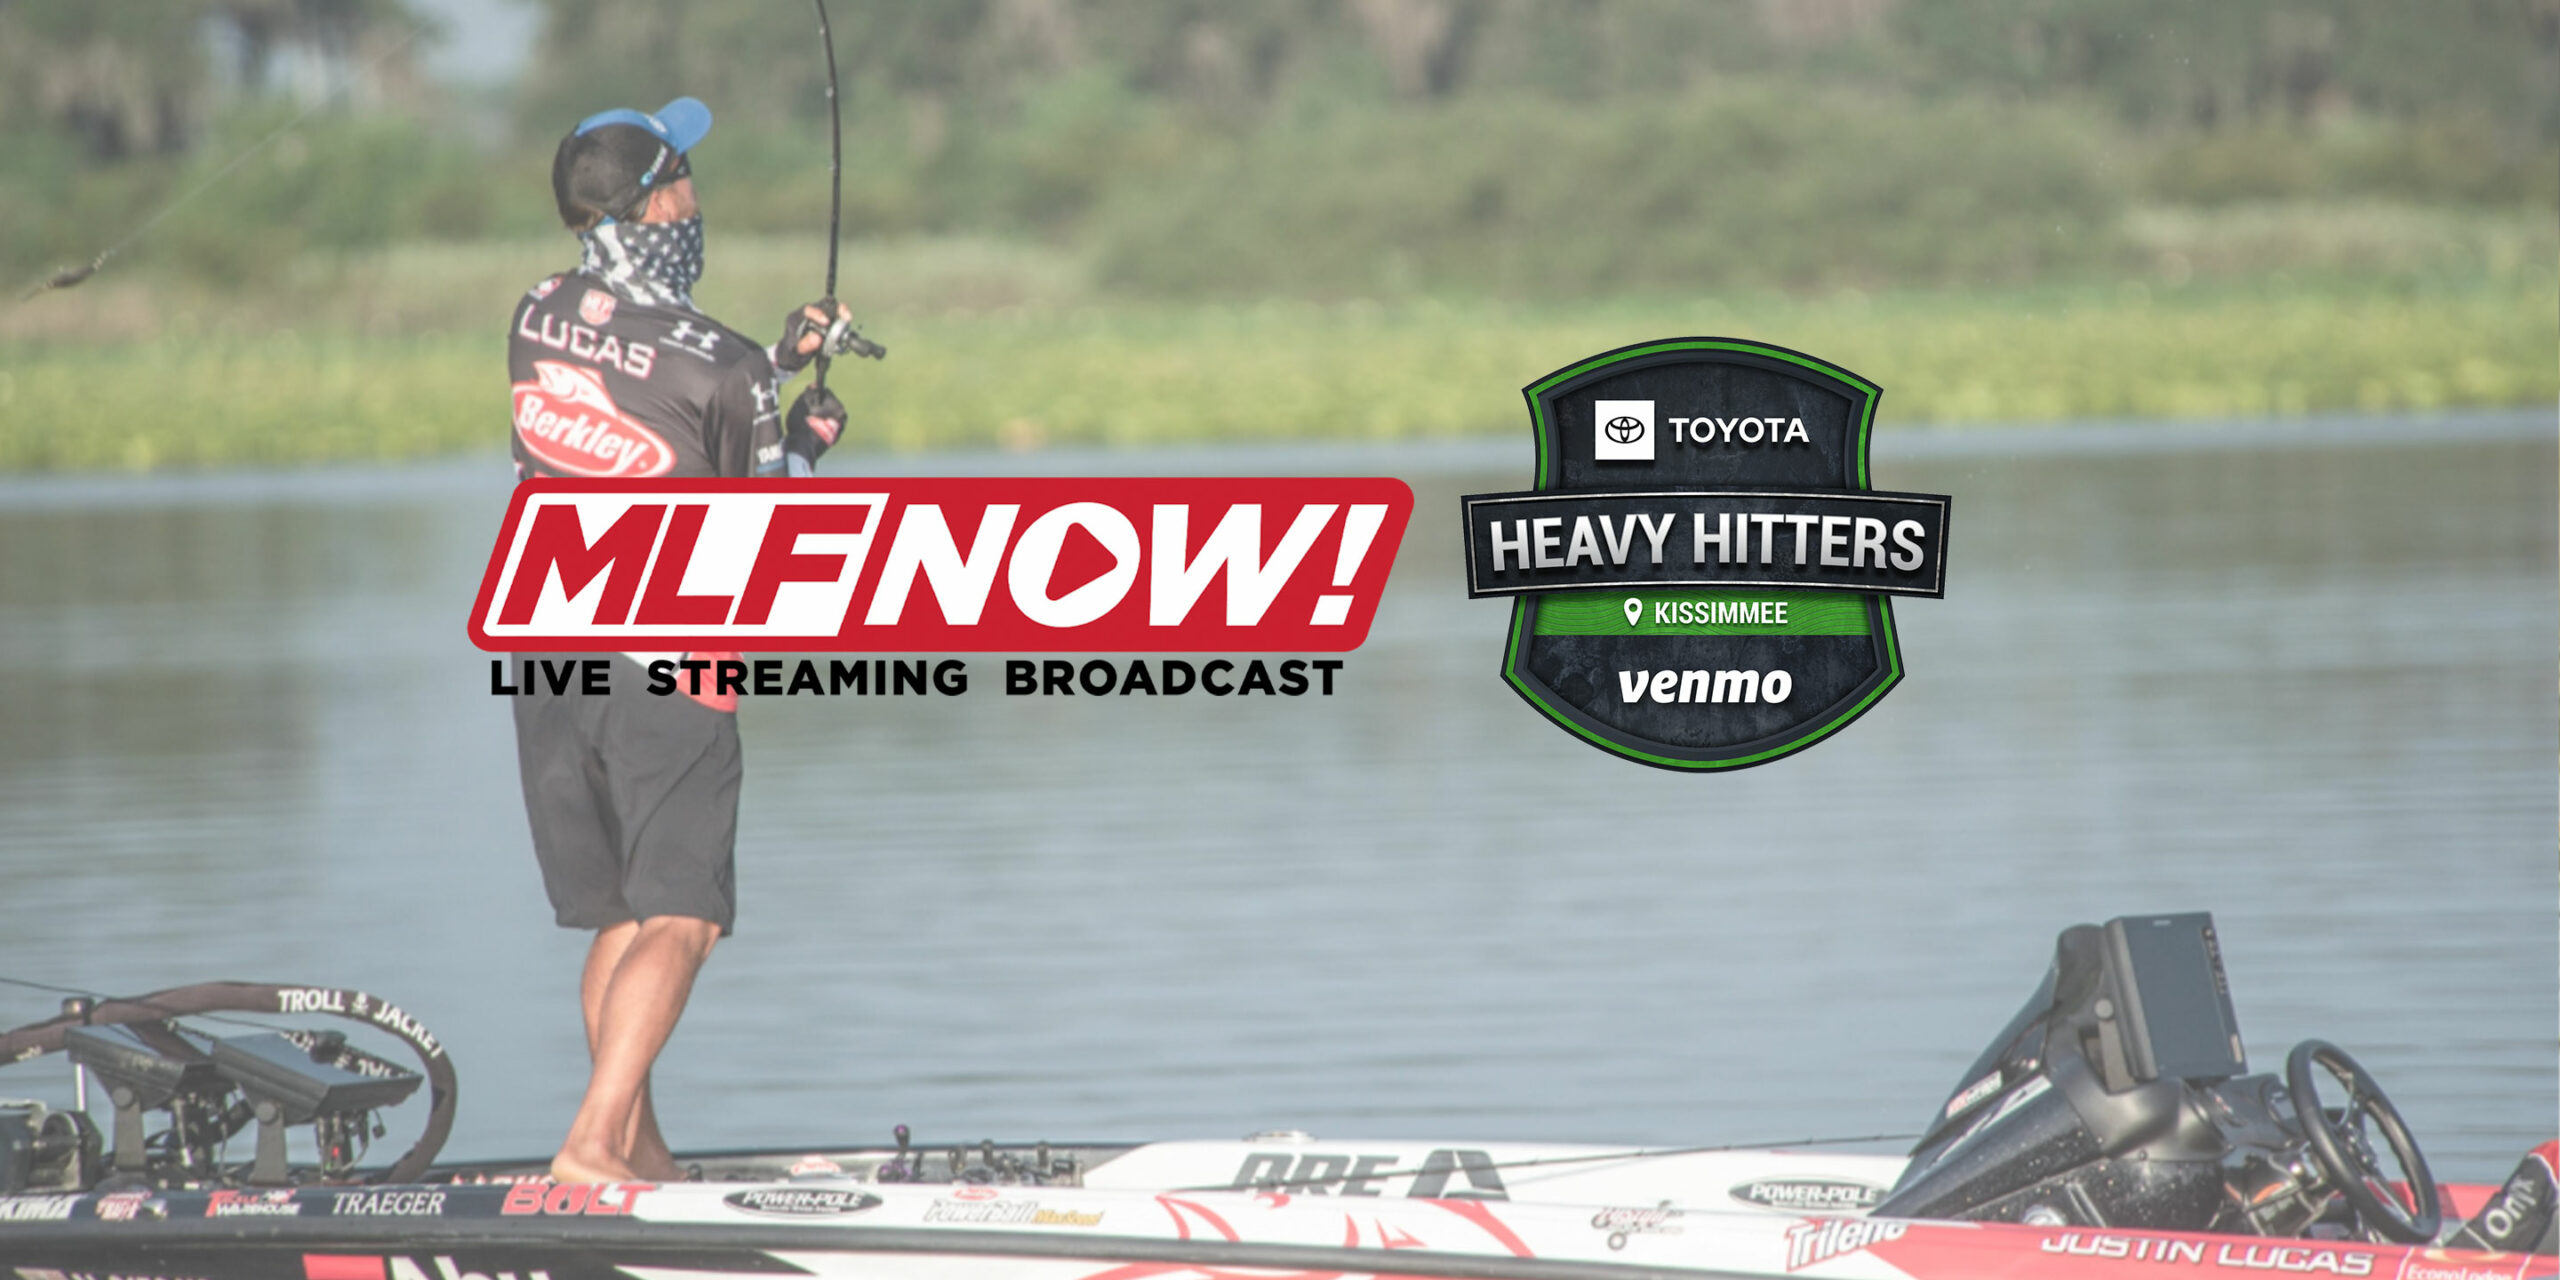 Bass Pro Tour Heavy Hitters Qualifying Day 3 MLF NOW! Live Stream (Part